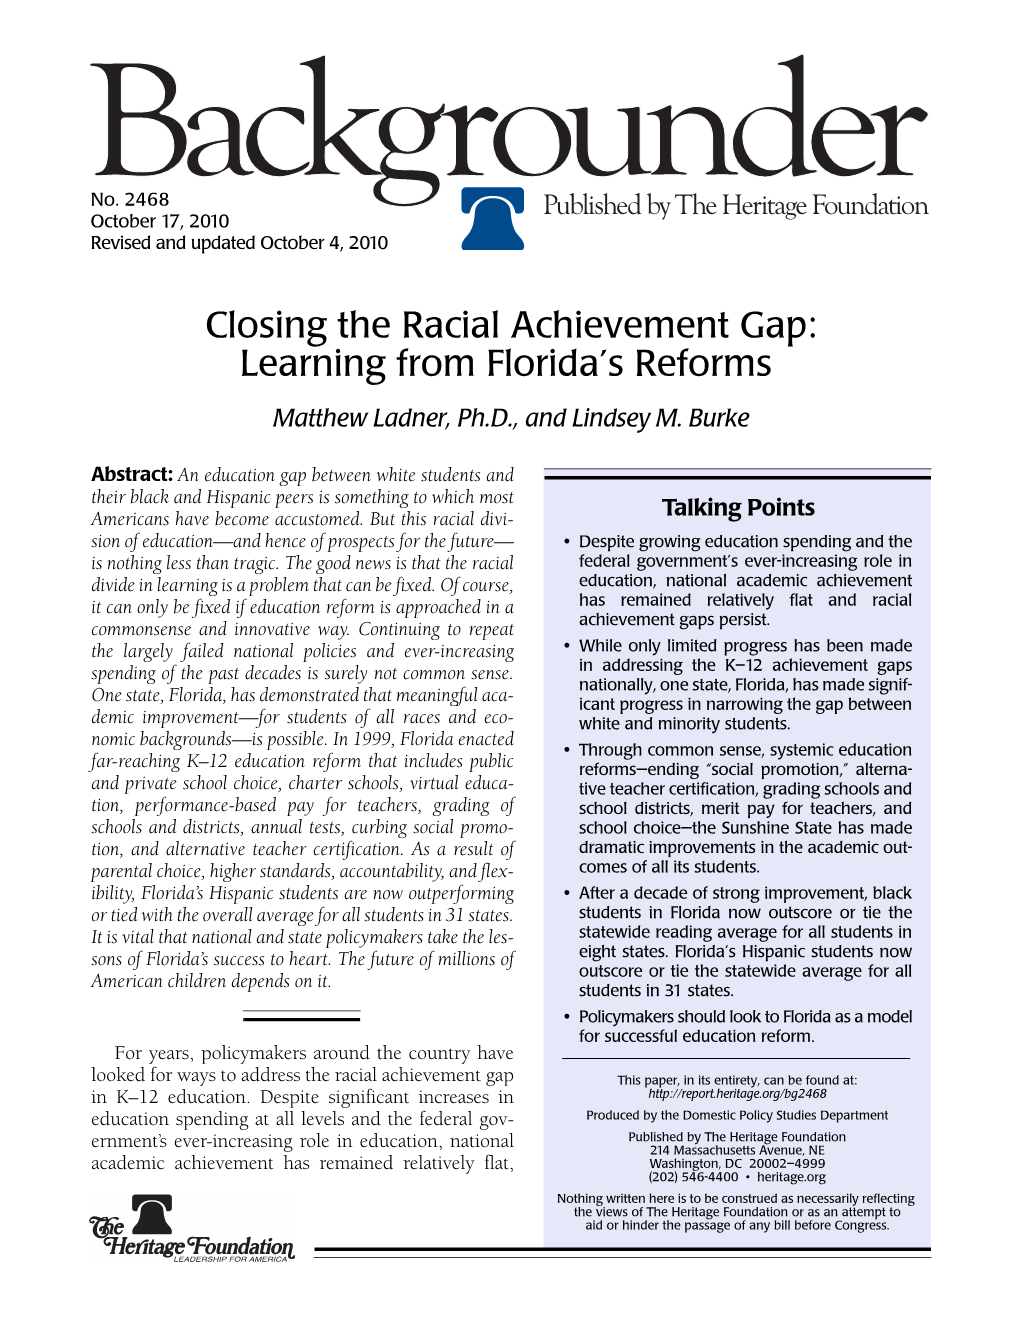 Closing the Racial Achievement Gap: Learning from Florida's Reforms